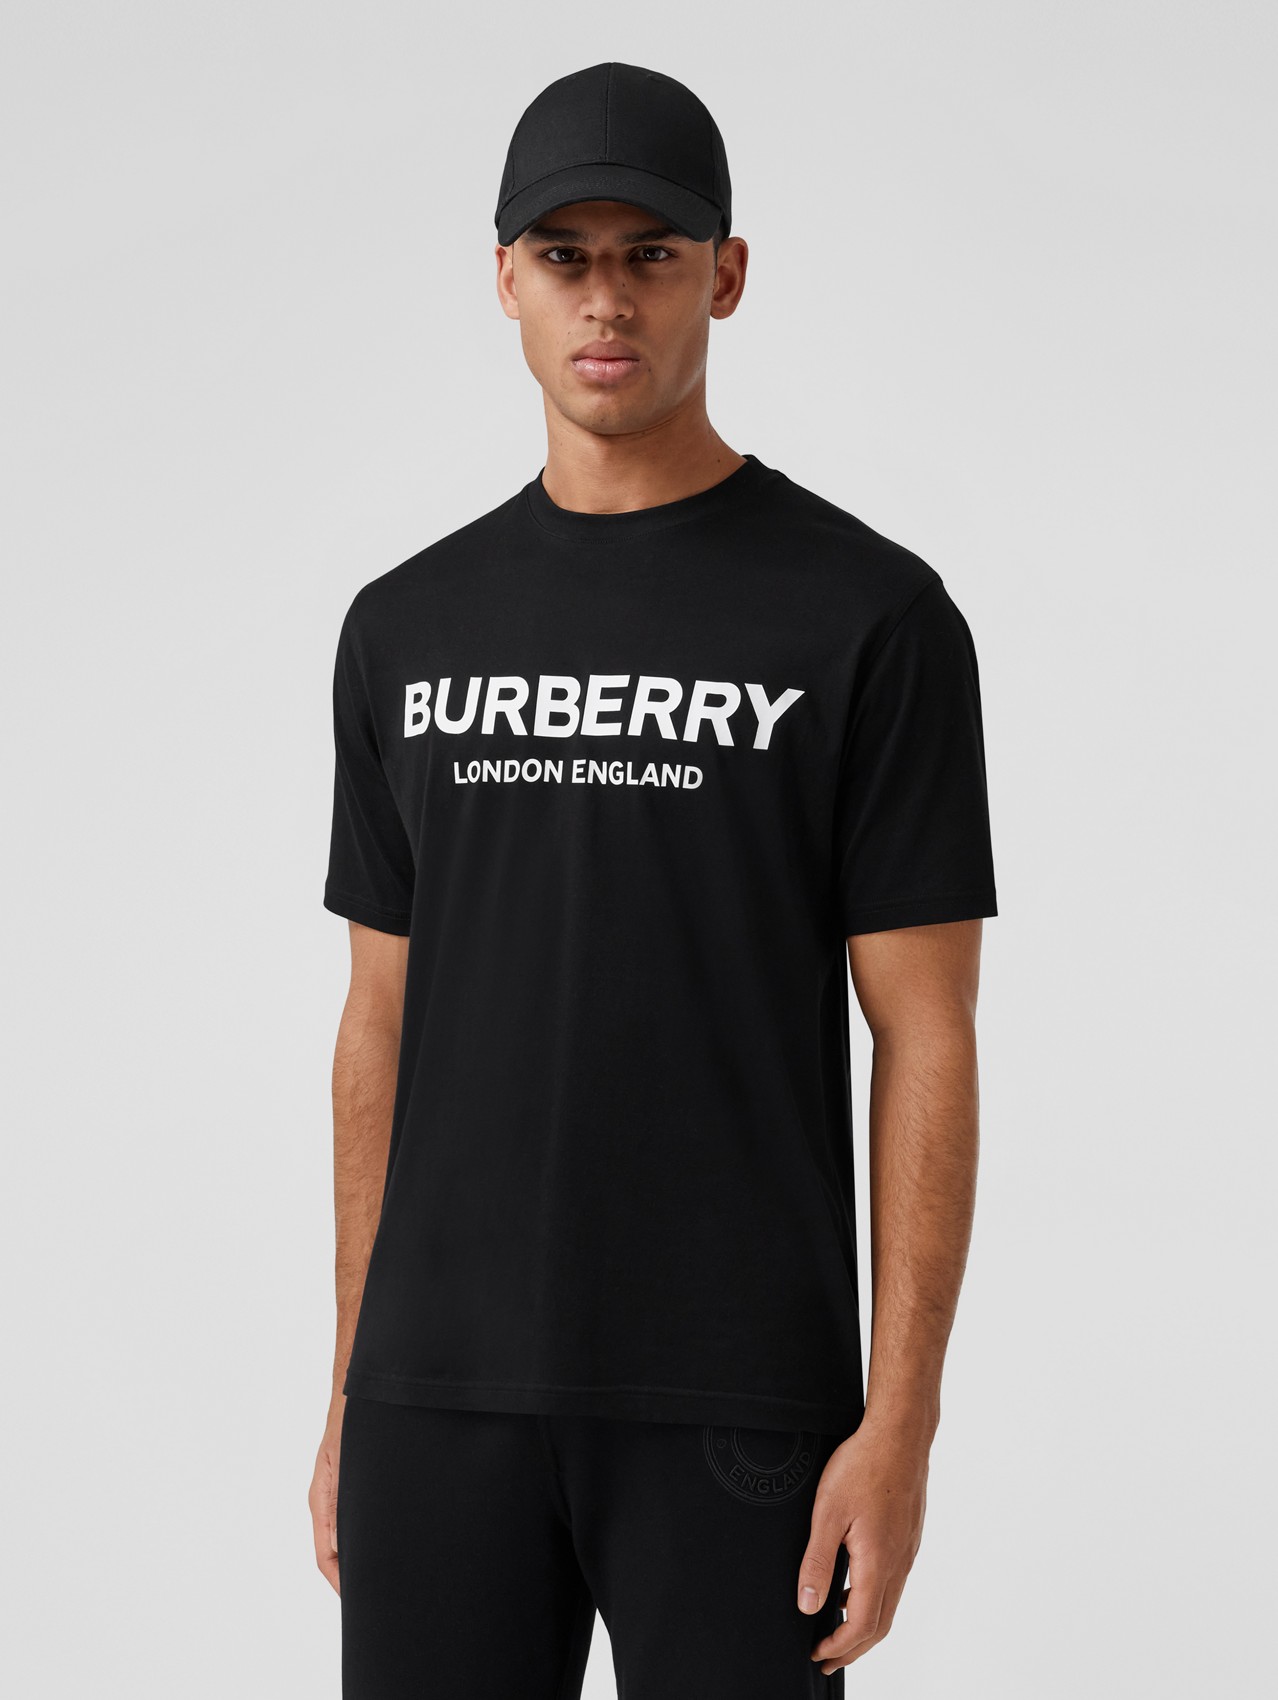 pyramid in the meantime Breakdown Men's Designer Polo Shirts & T-shirts | Burberry® Official